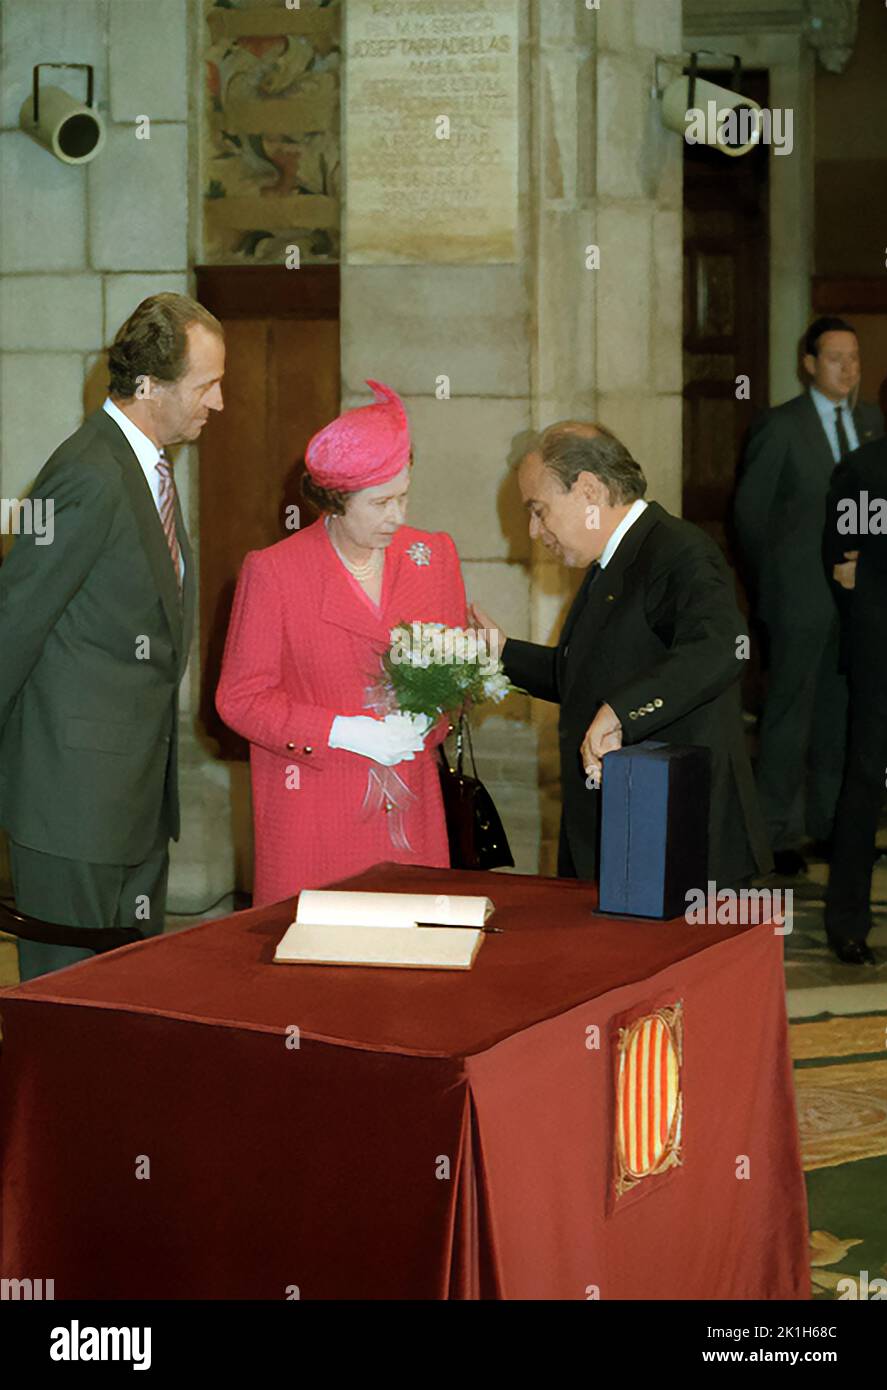 Jordi Pujol  explains Queen Elizabeth resemblances between the Catalan and Scottish cases in the presence of II King Juan Carlos I Stock Photo